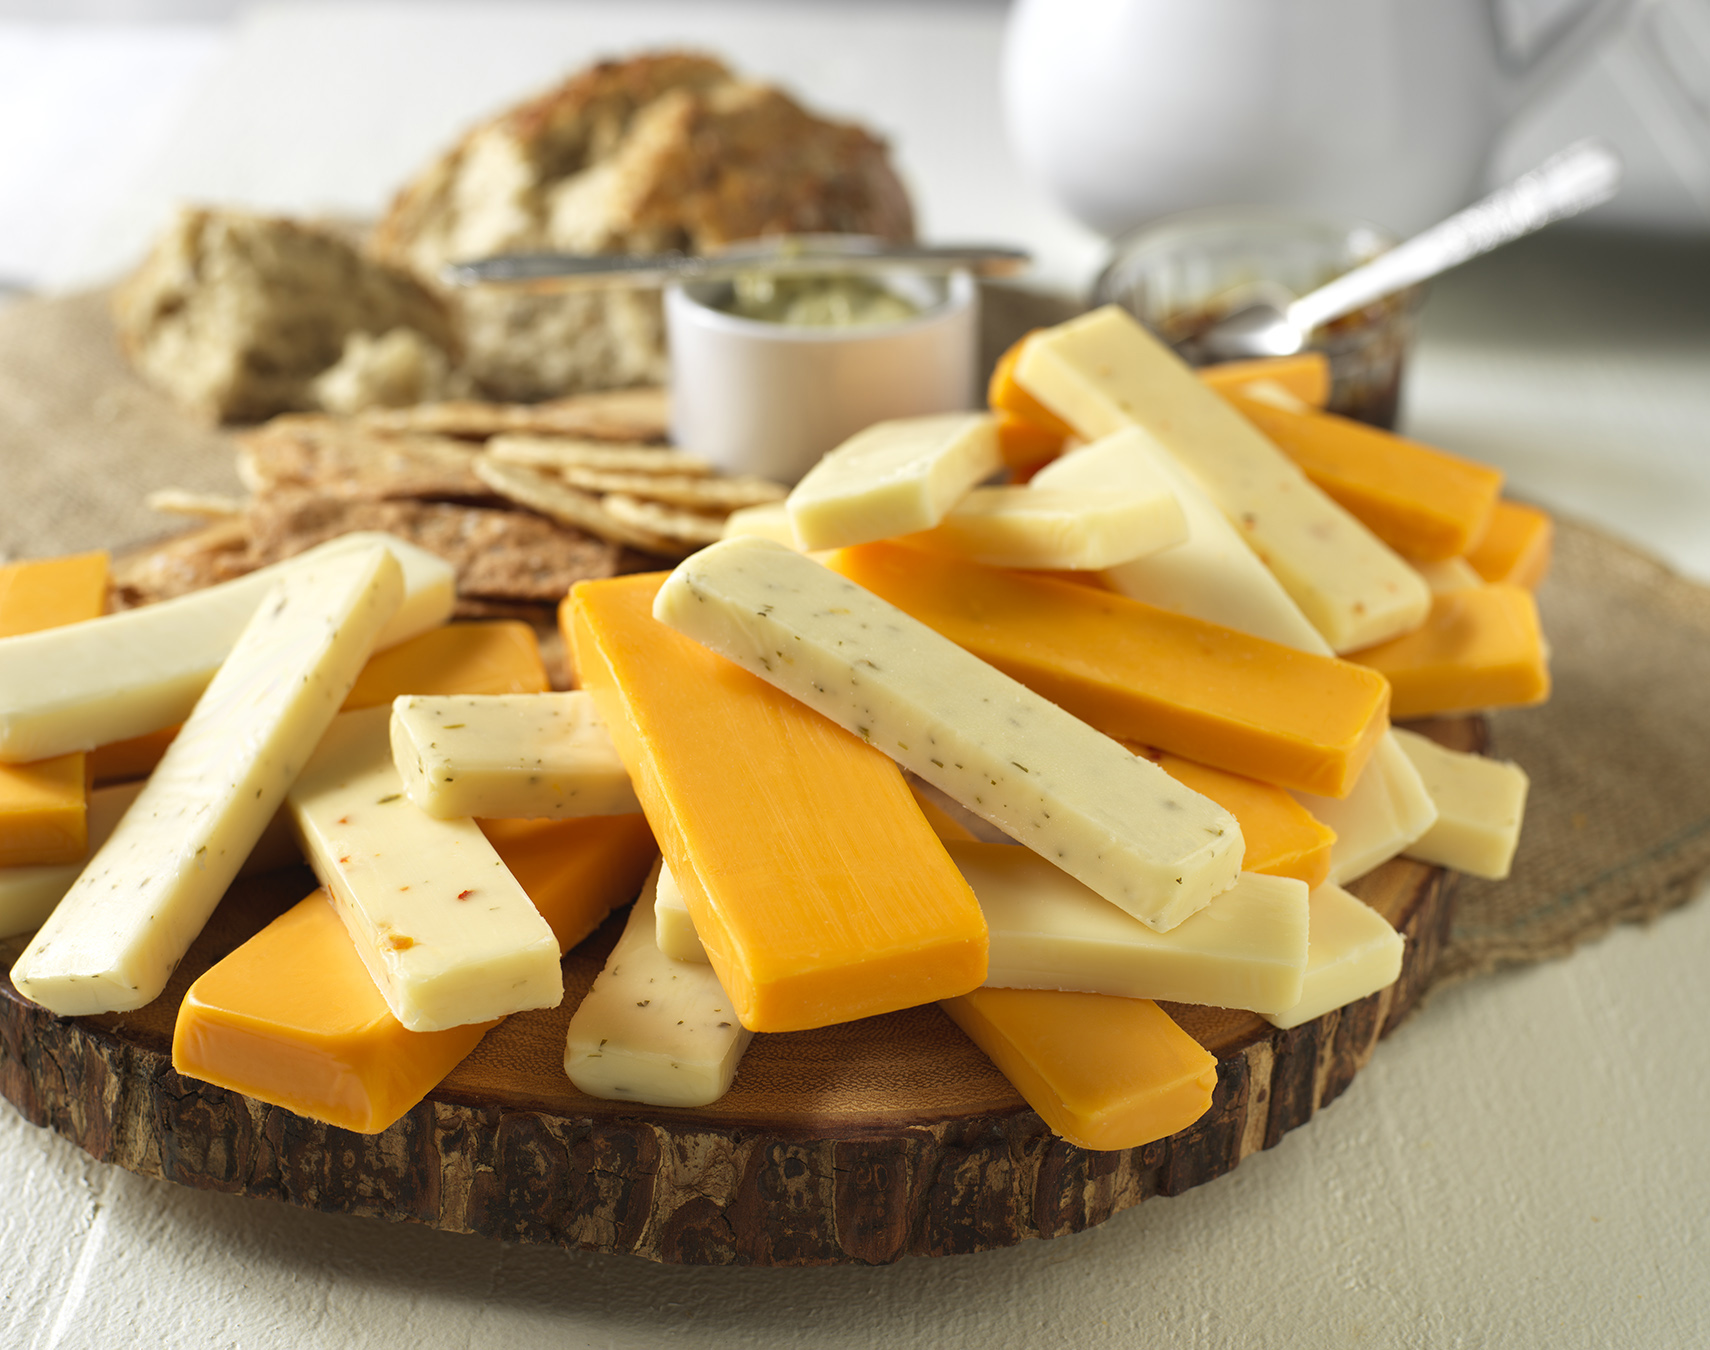 Gilman cheese offers .75oz 1oz and 2oz cheese planks